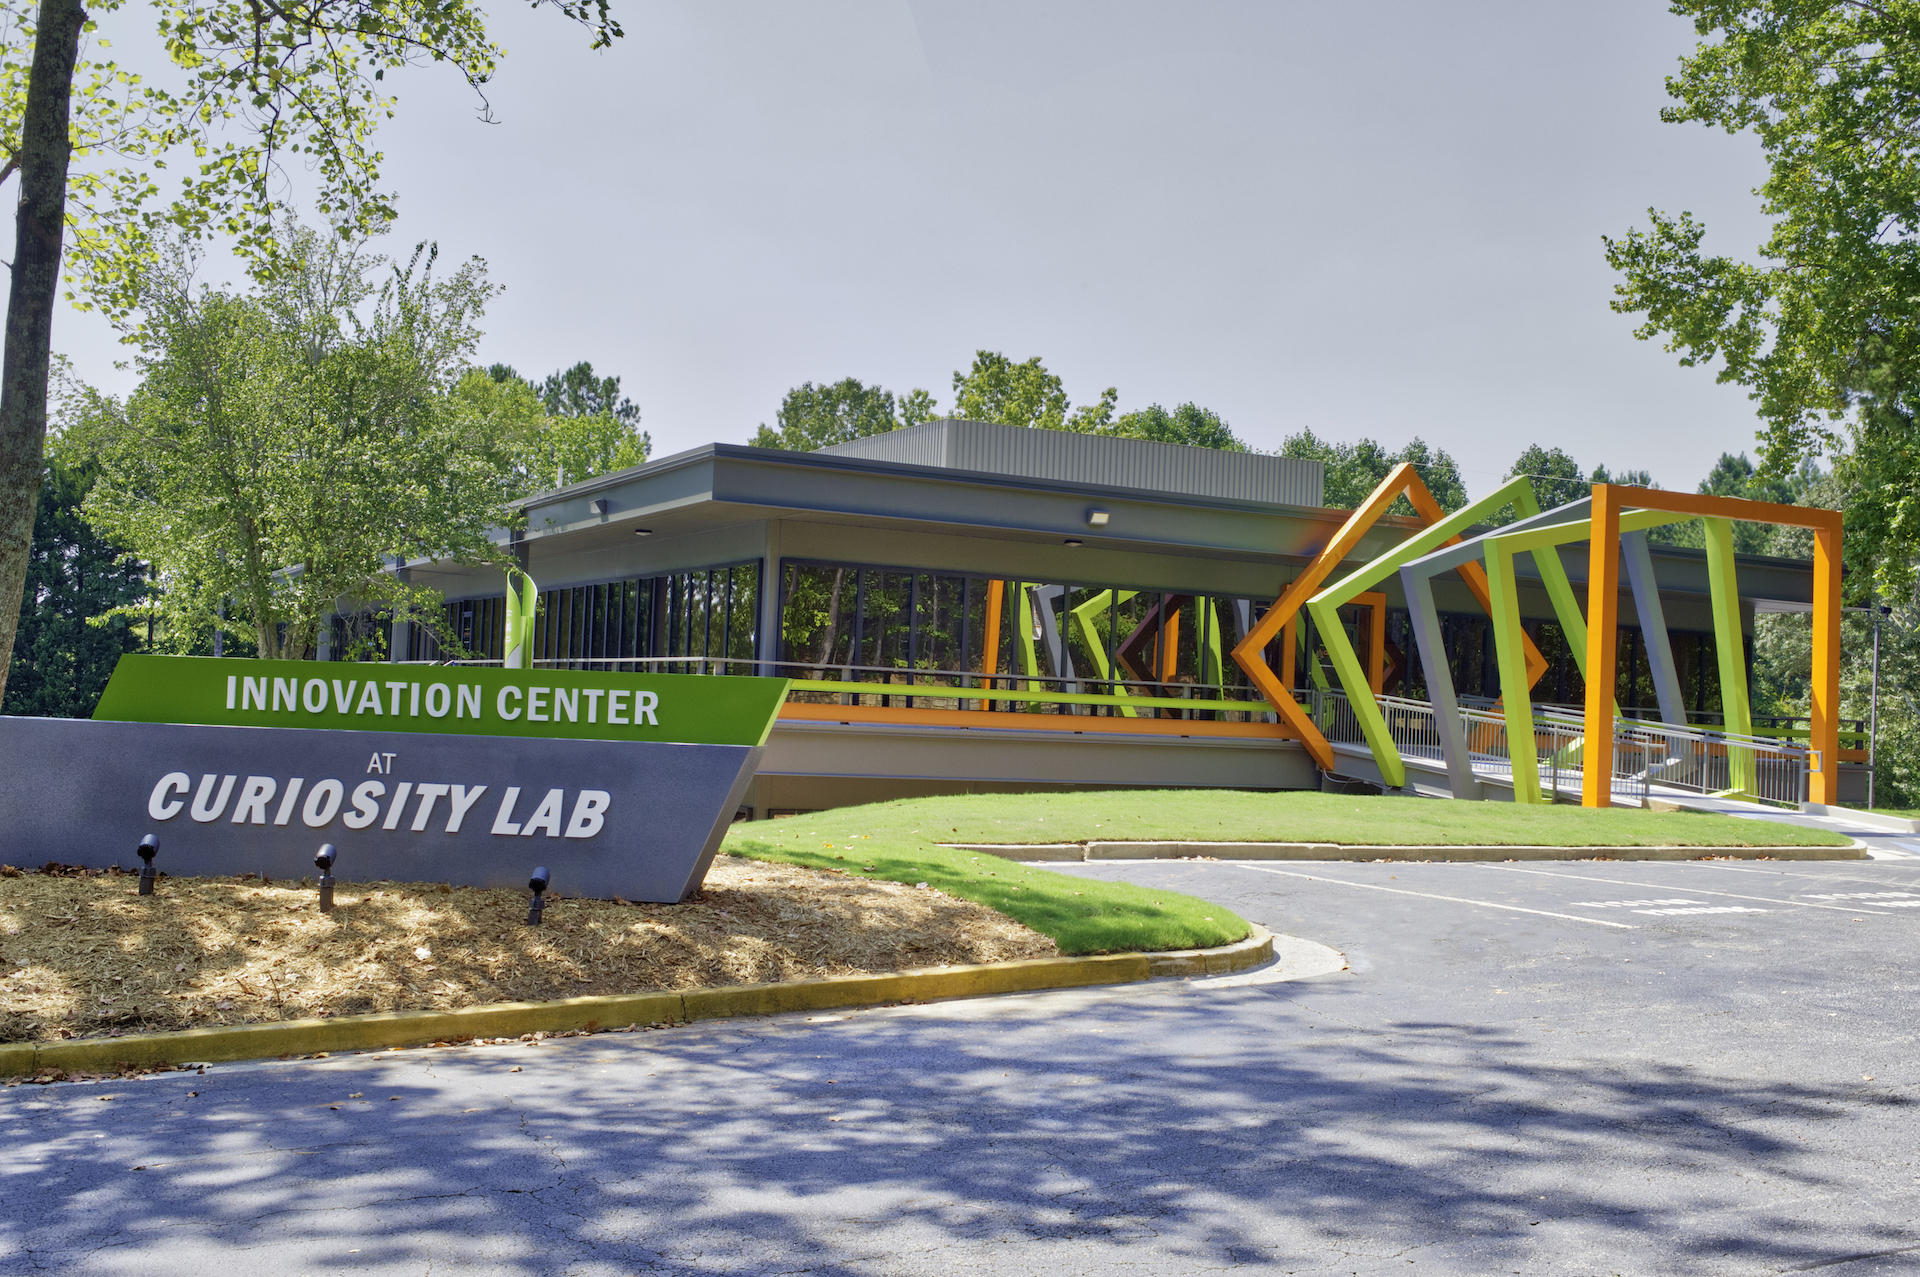 Curiosity Labs at Peachtree Corners is home to the 5G Connected Future incubator that will be managed by Georgia Tech's Advanced Technology Development Center (ATDC).